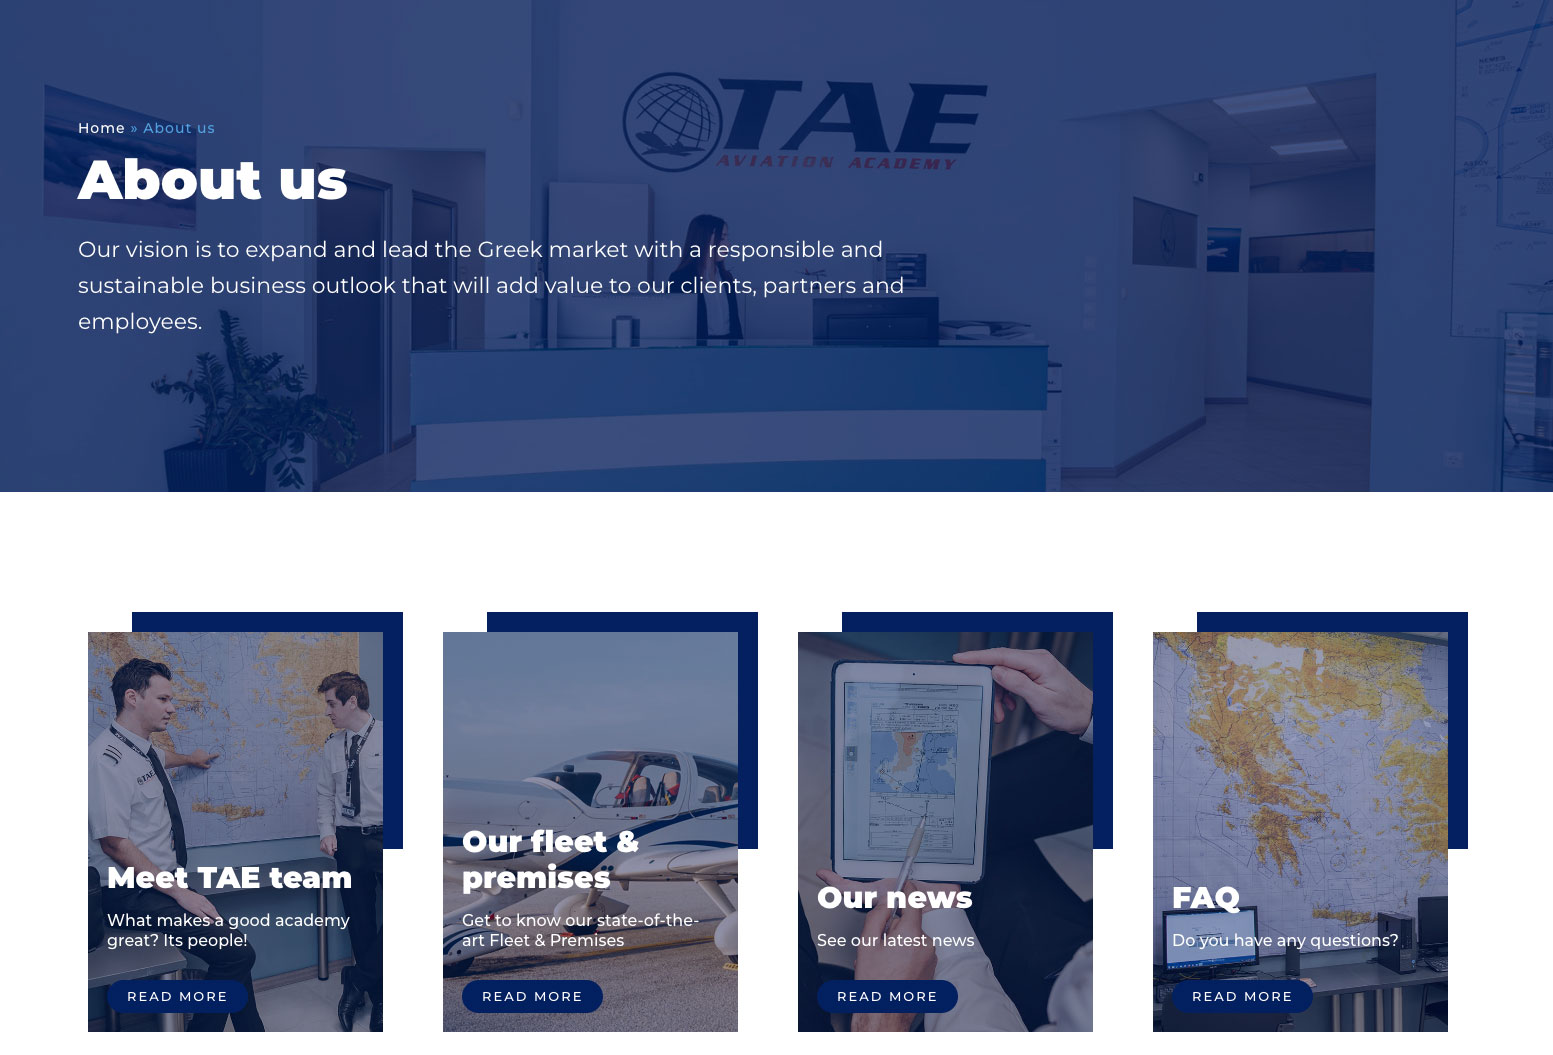 About-us-TAE-Aviation-Academy-4